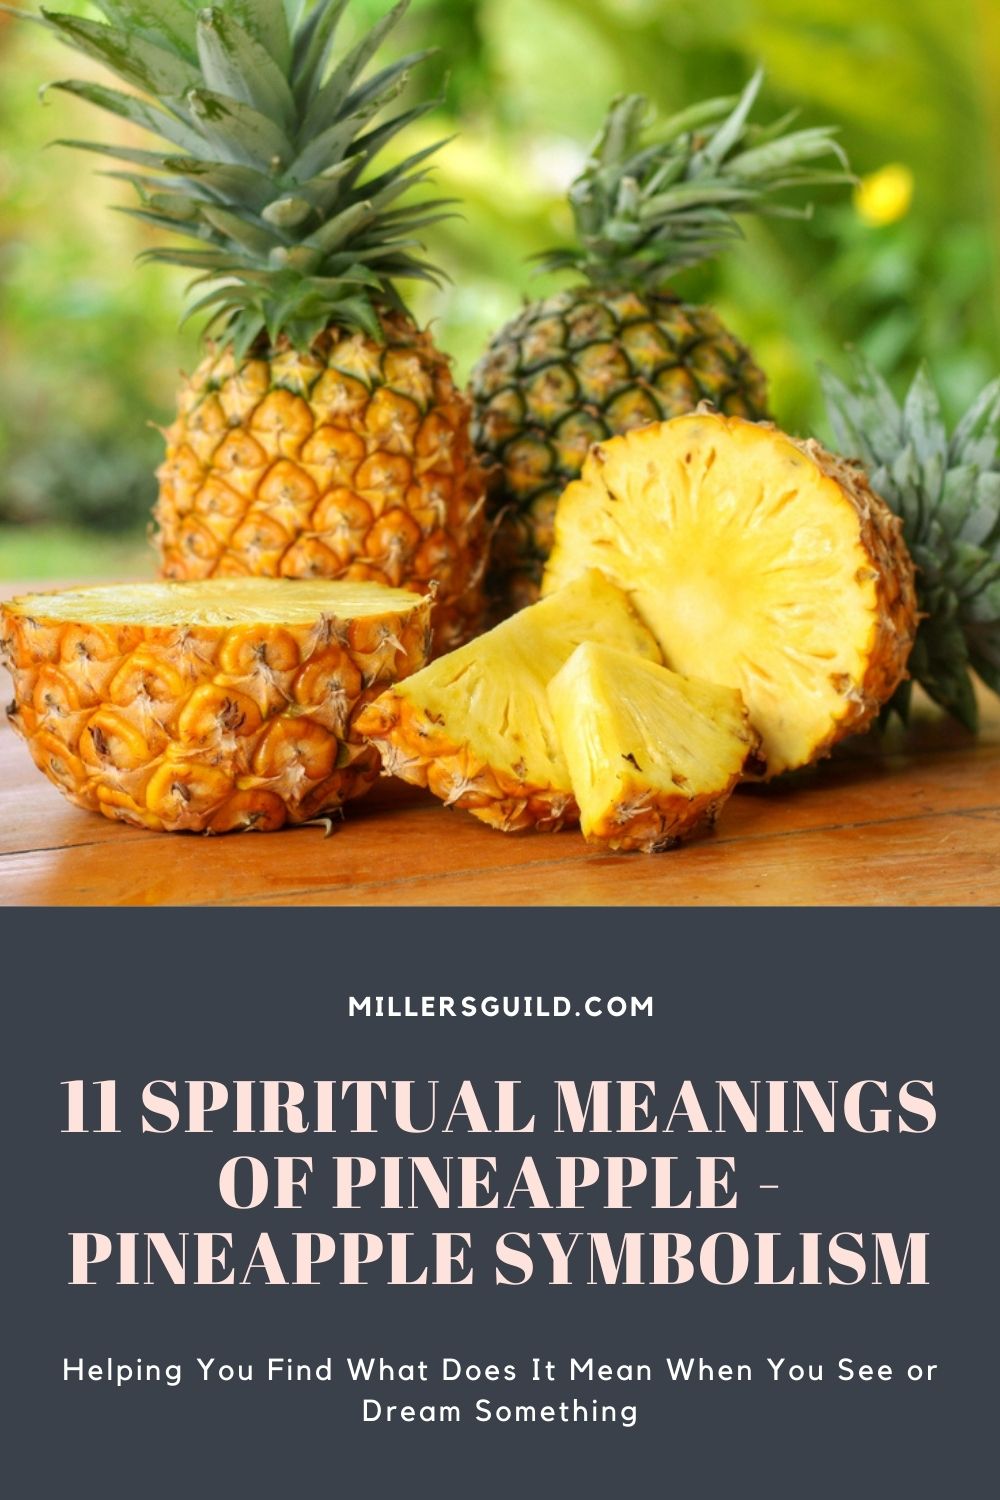 11 Spiritual Meanings of Pineapple - Pineapple Symbolism 1